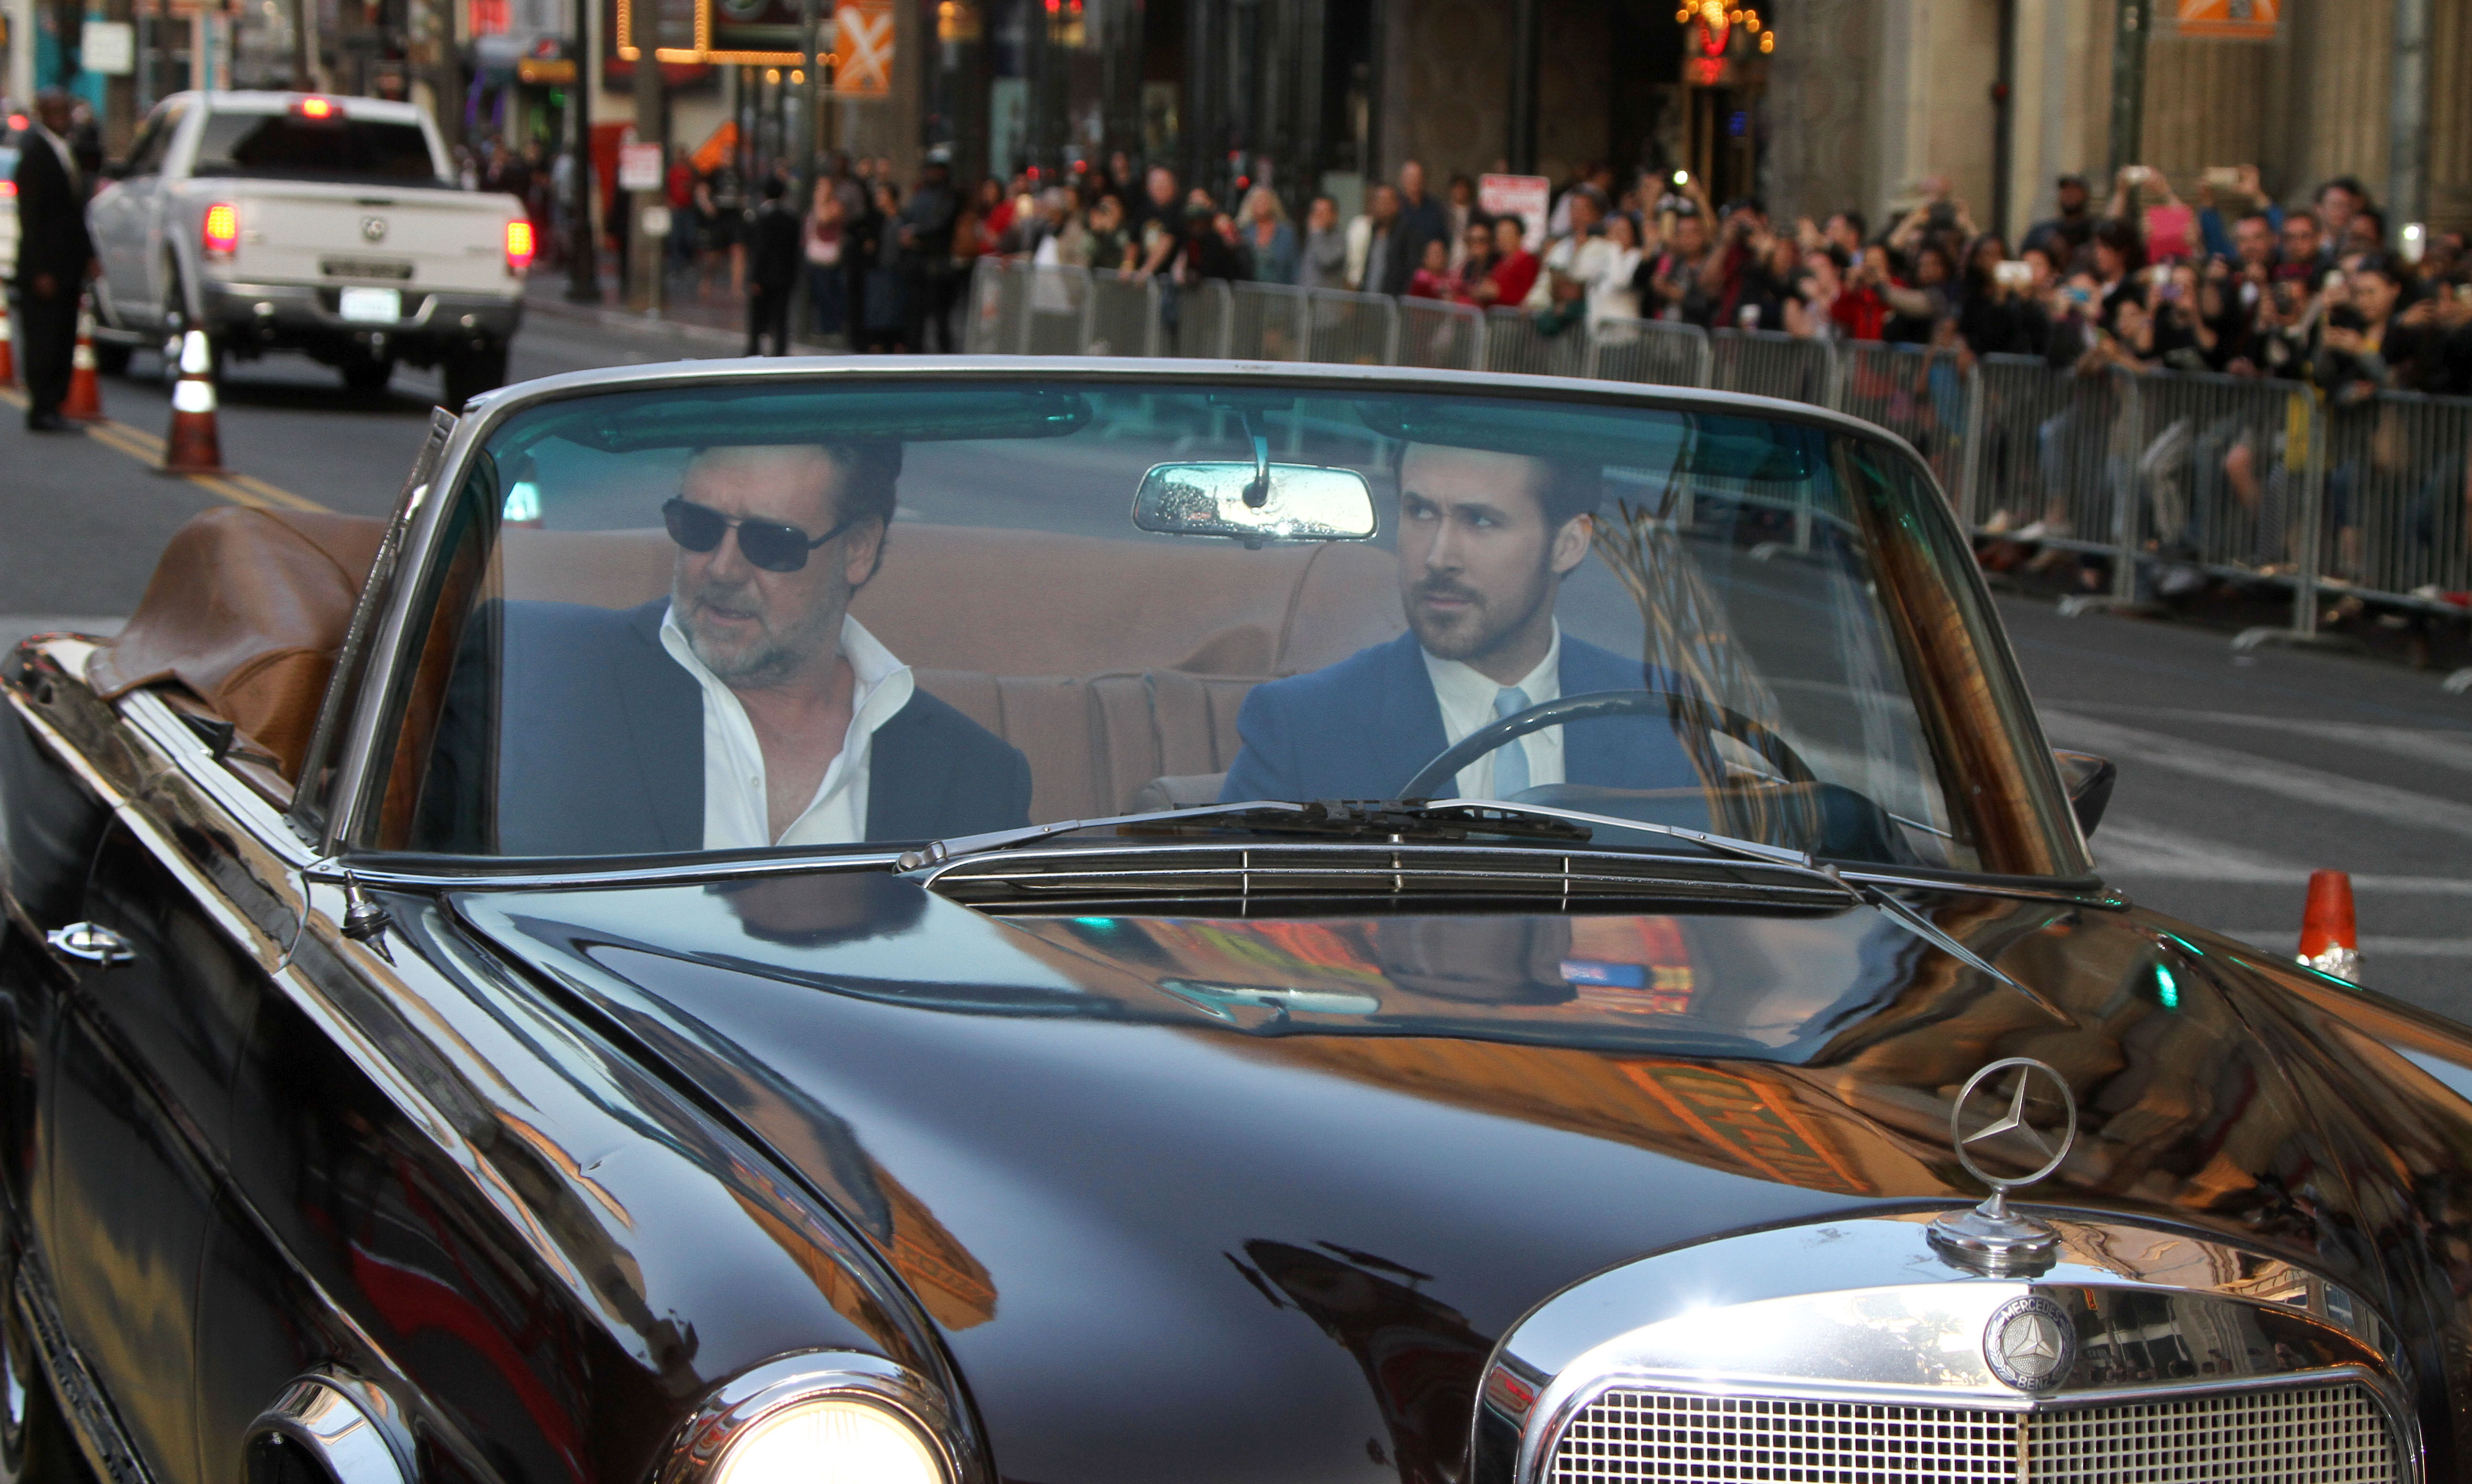 Your Afternoon Men: Ryan Gosling and Russell Crowe at “The Nice Guys” Premiere